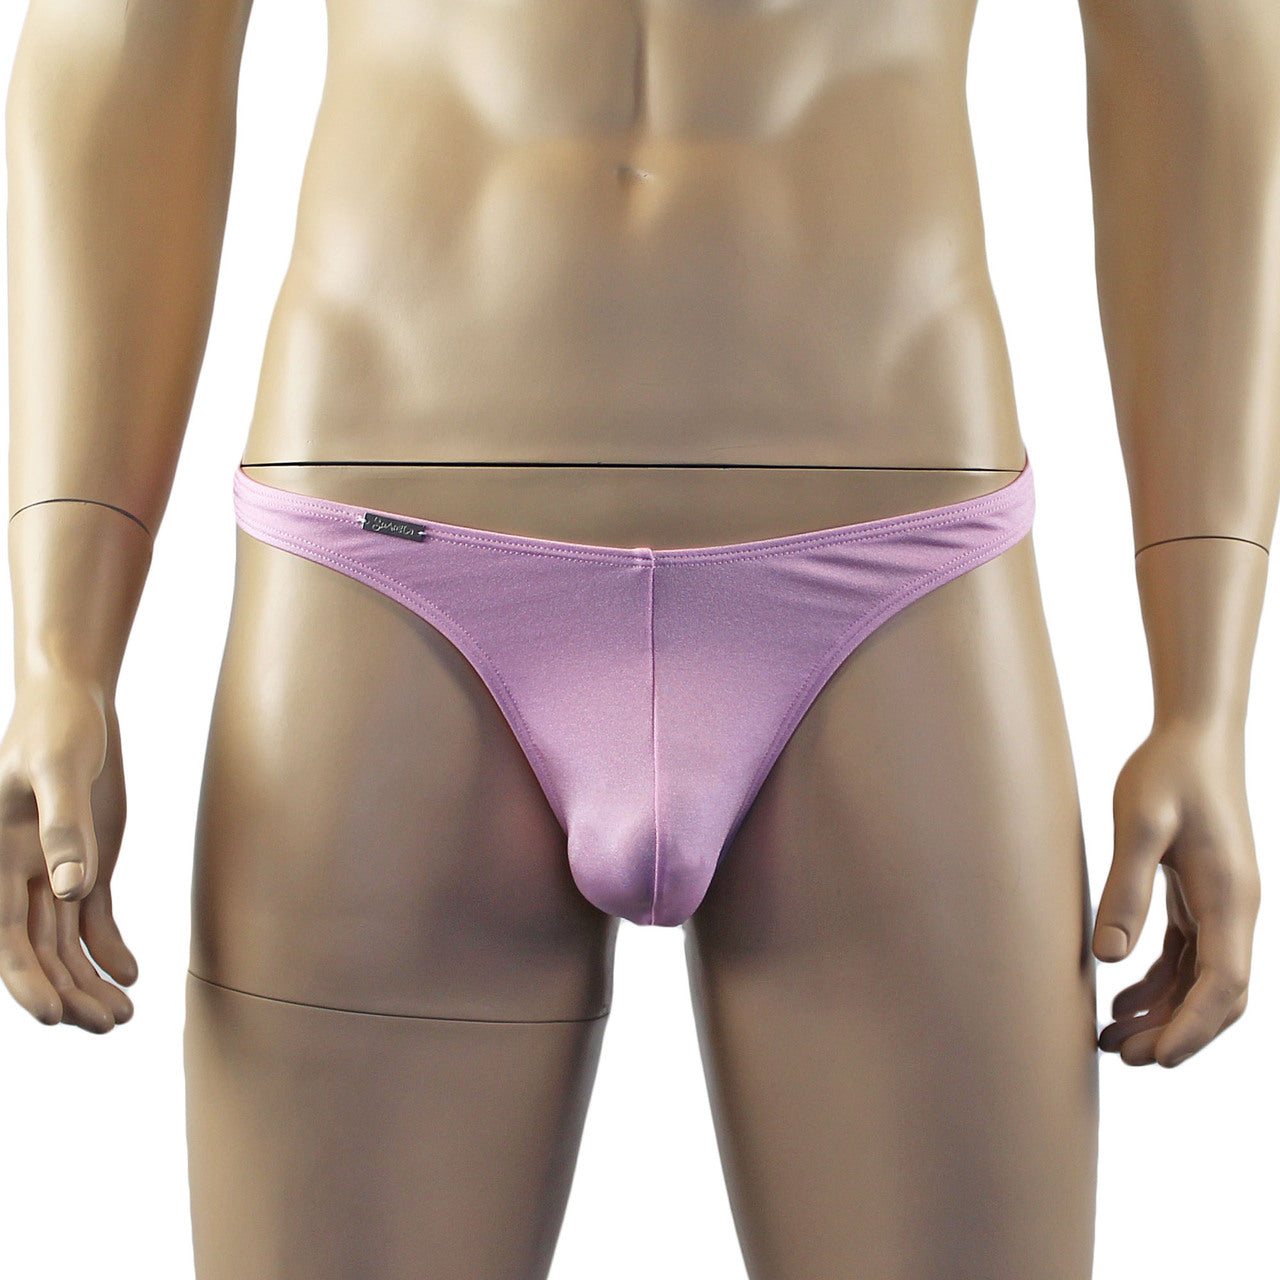 Mens Lycra G string Thong Underwear Lingerie (baby pink plus other colours)